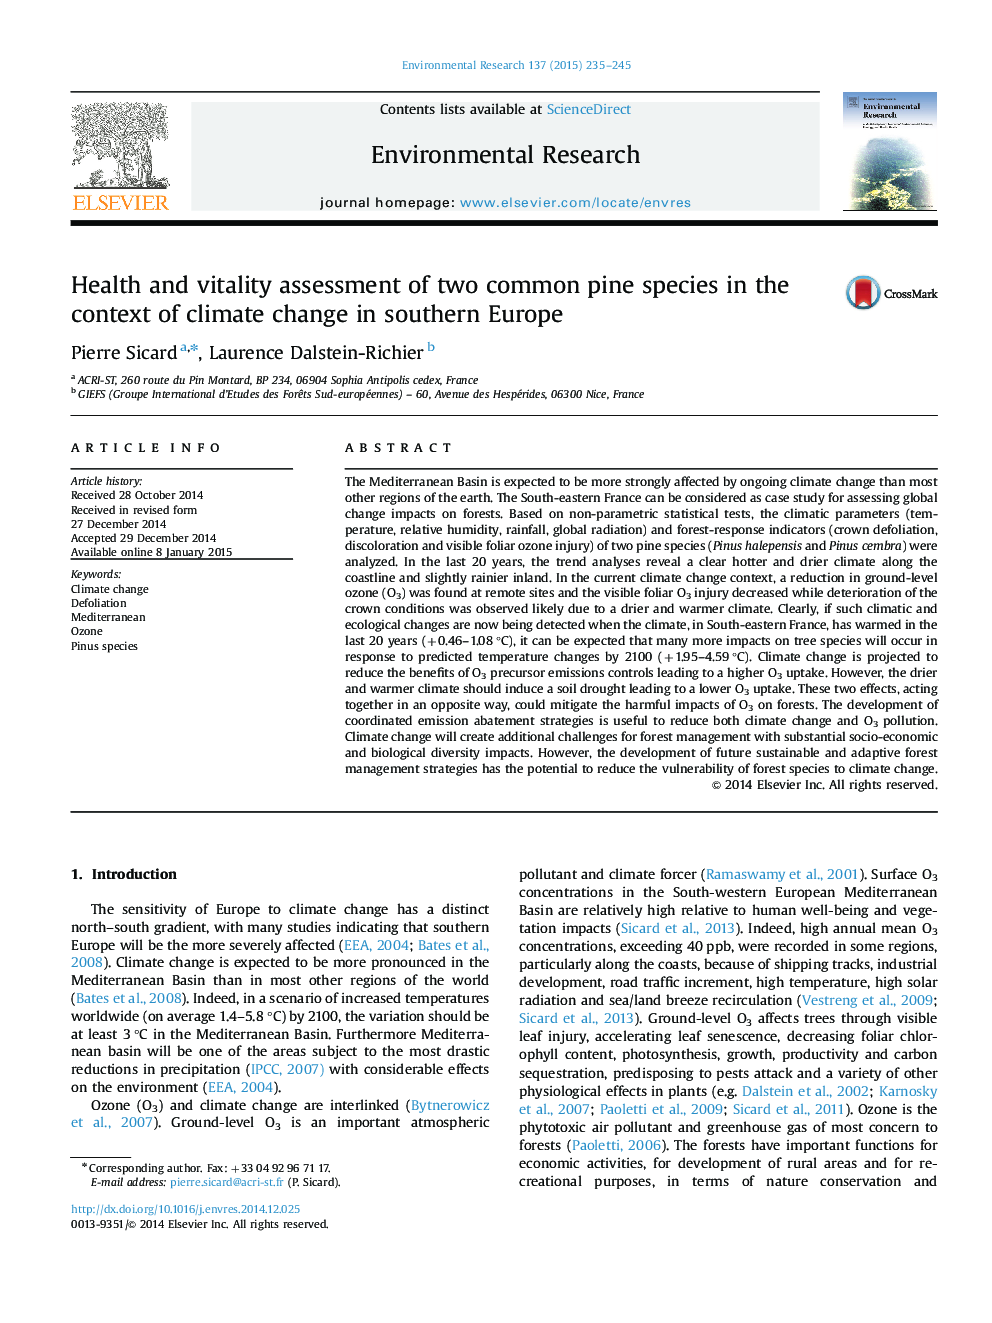 Health and vitality assessment of two common pine species in the context of climate change in southern Europe